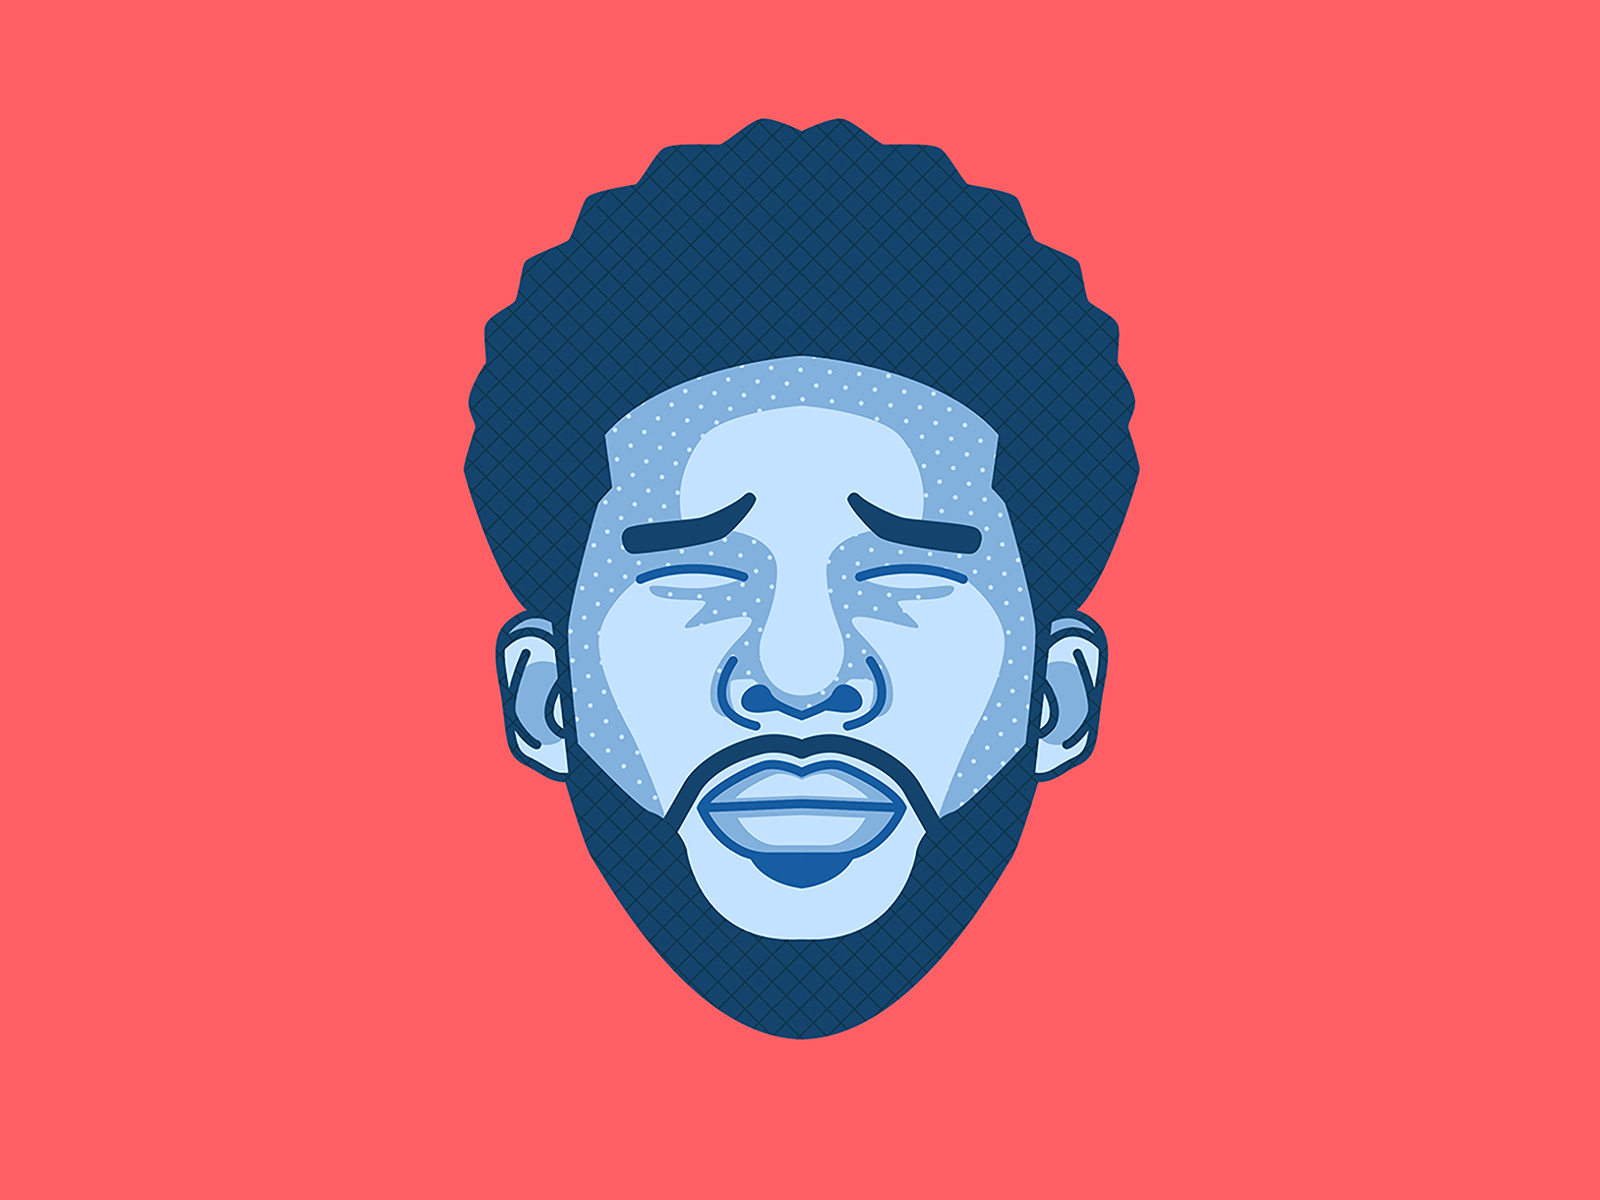 Joel Embiid Crying by Derek Frisicchio on Dribbble